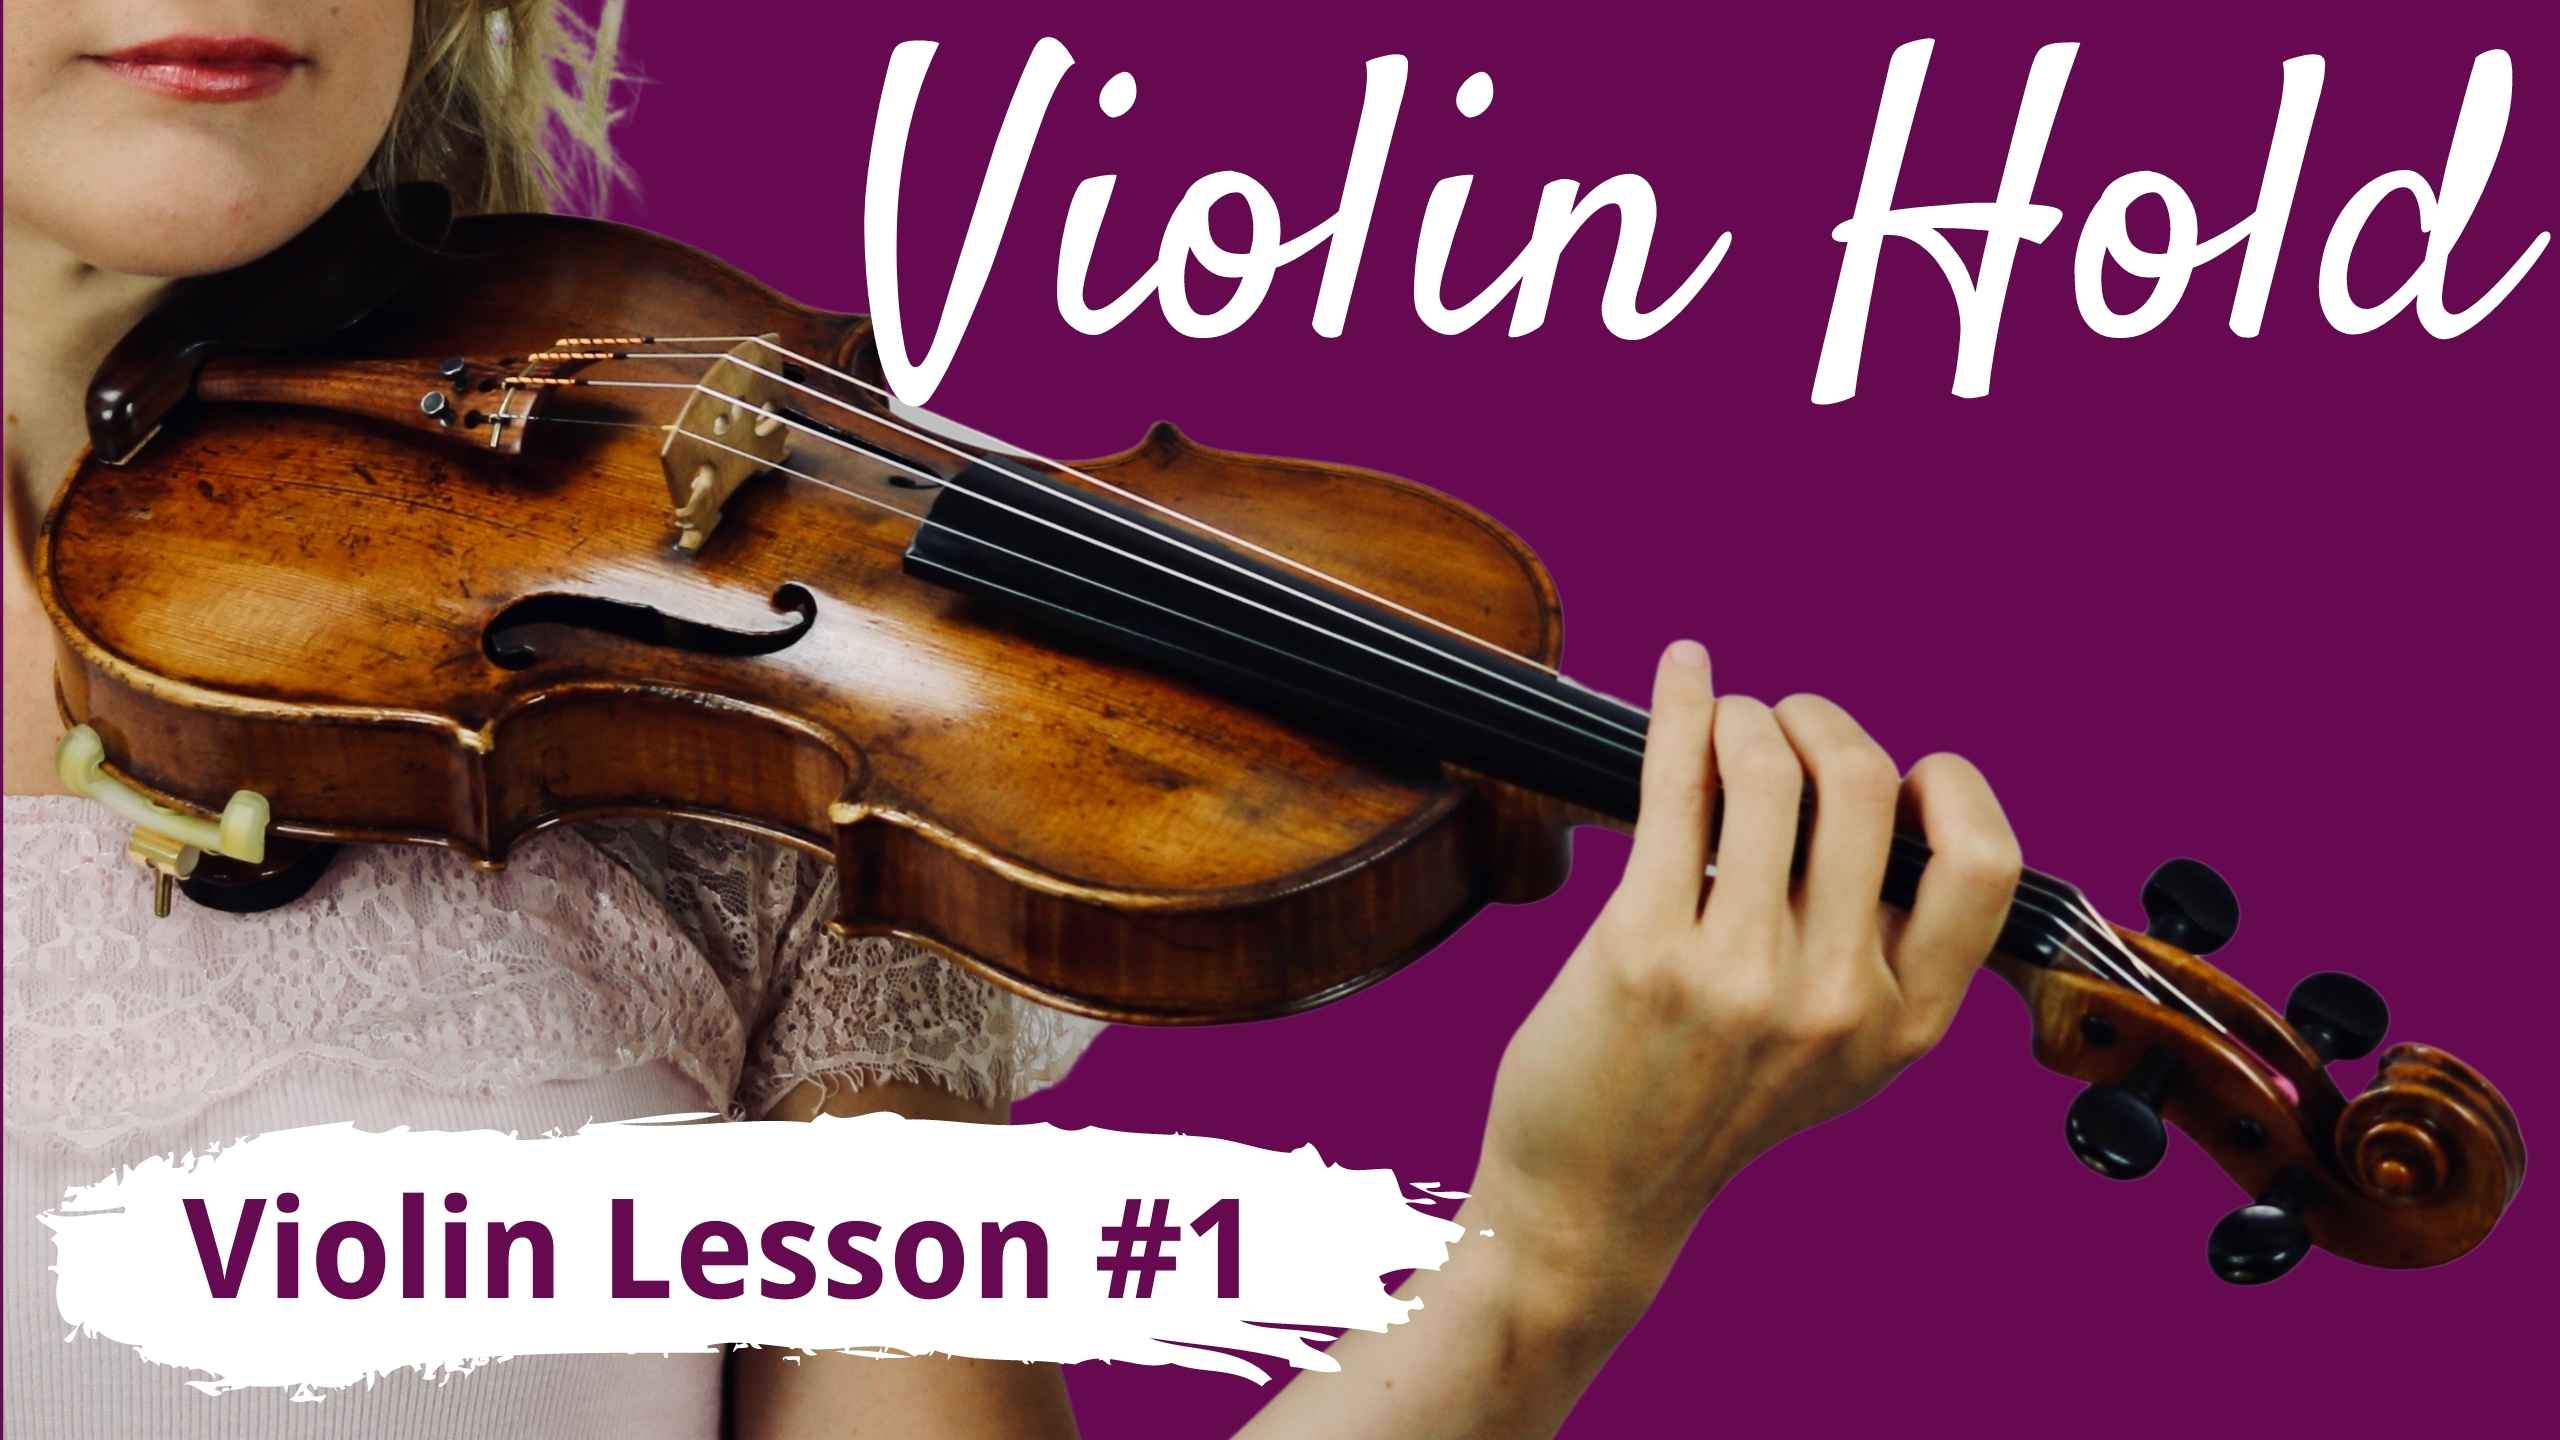 FREE Violin Lesson #1 for Beginners | Violin Hold